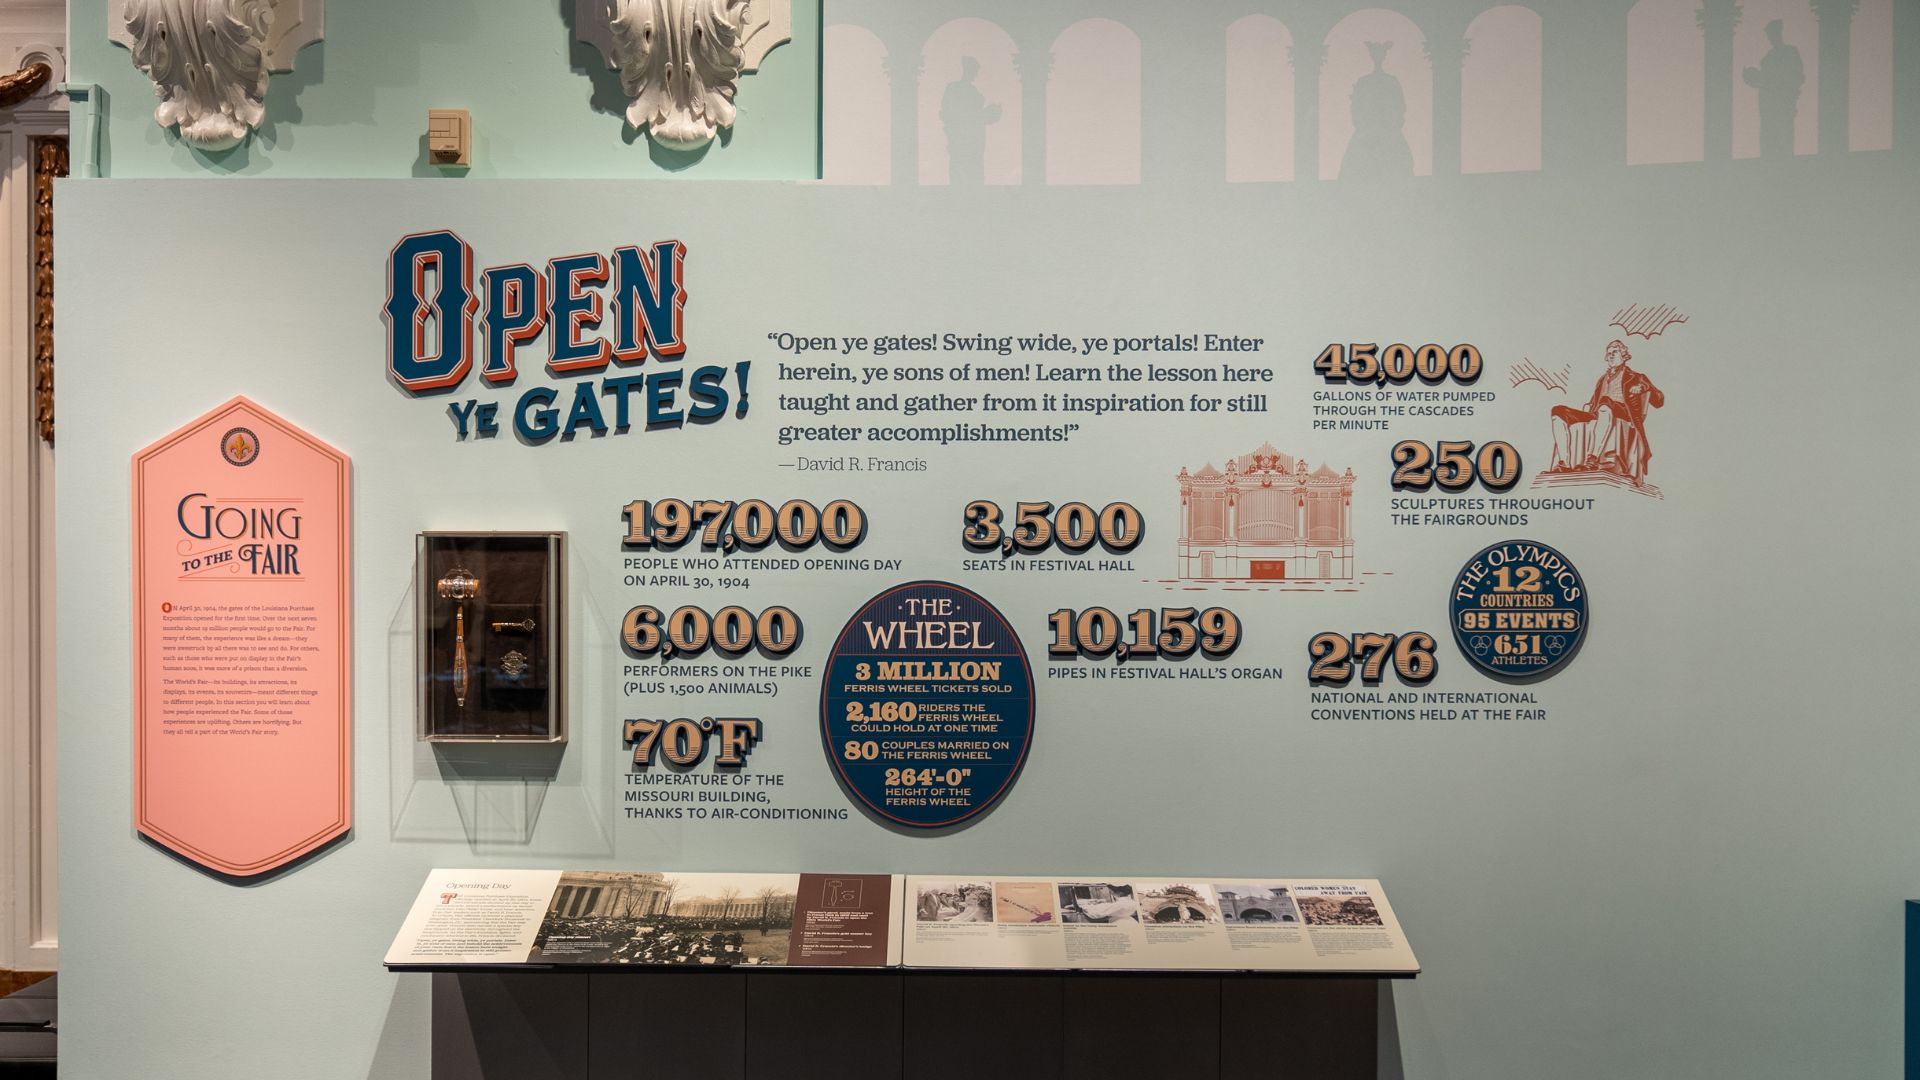 A new exhibit at the Missouri History Museum gives fun facts about the St. Louis World's Fair.